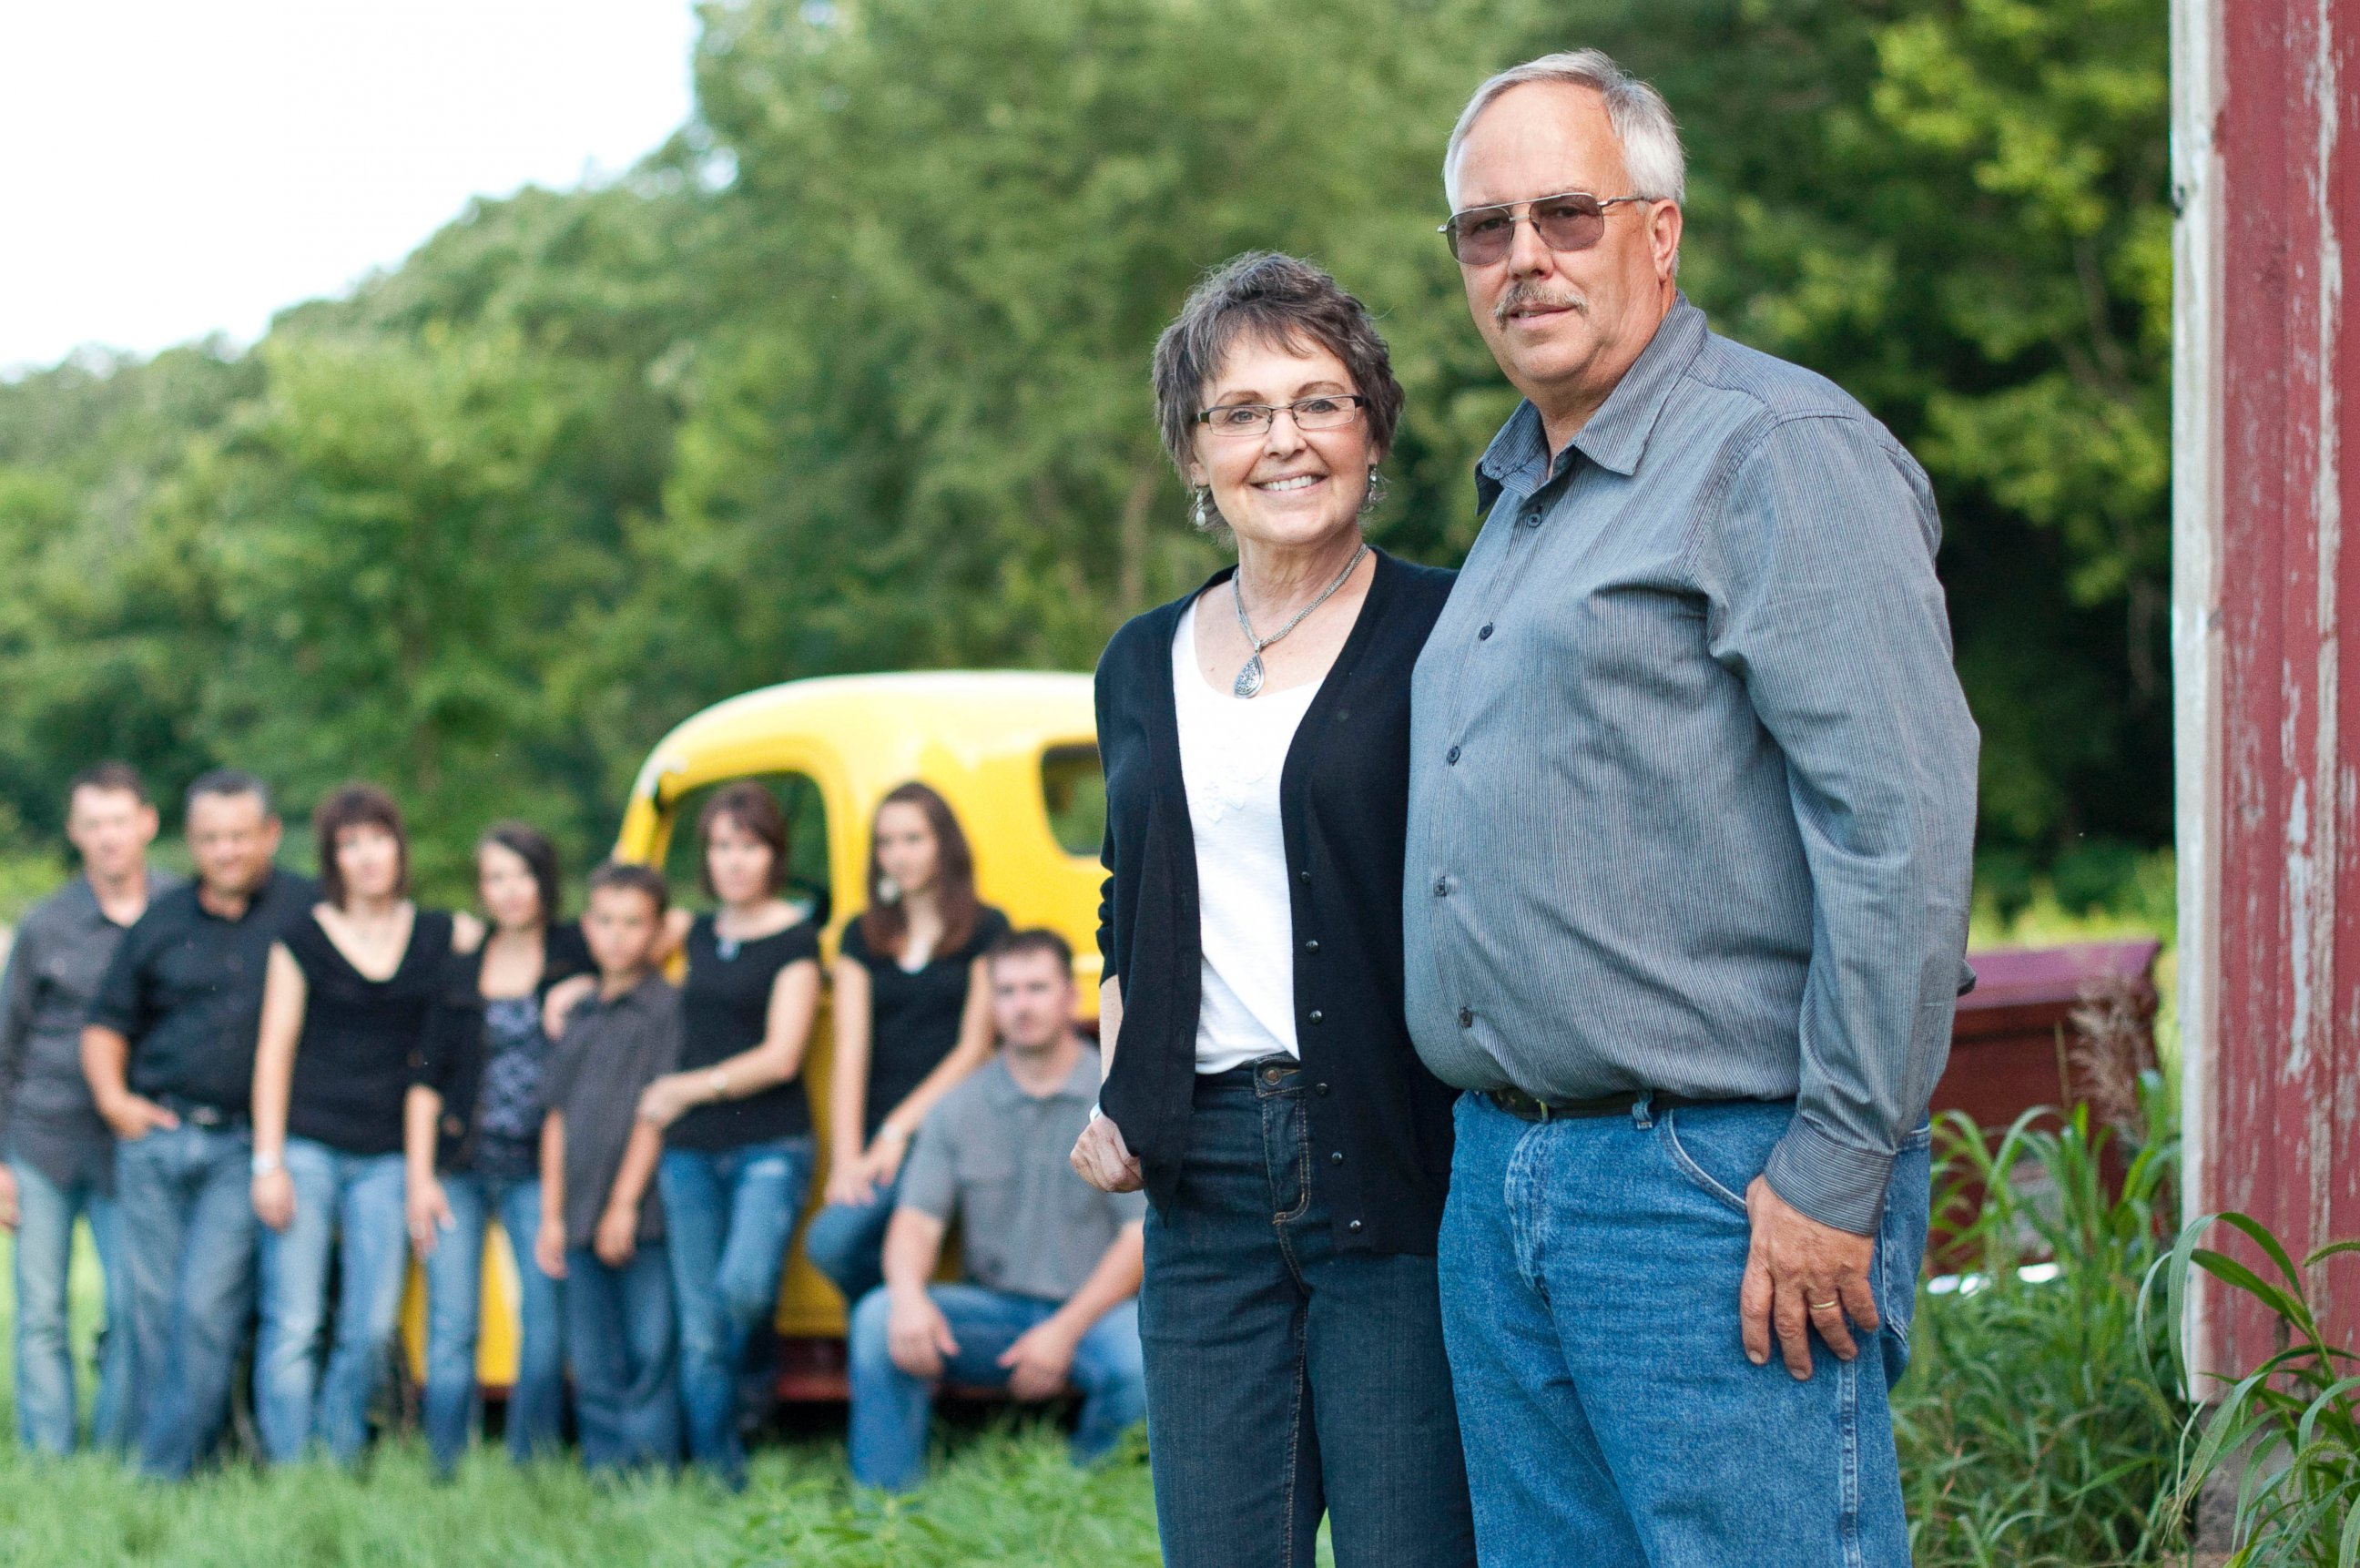 PHOTO: Don and Babbette Jaquish stand in their sunflower field with their family in the background in a photo taken in 2011.